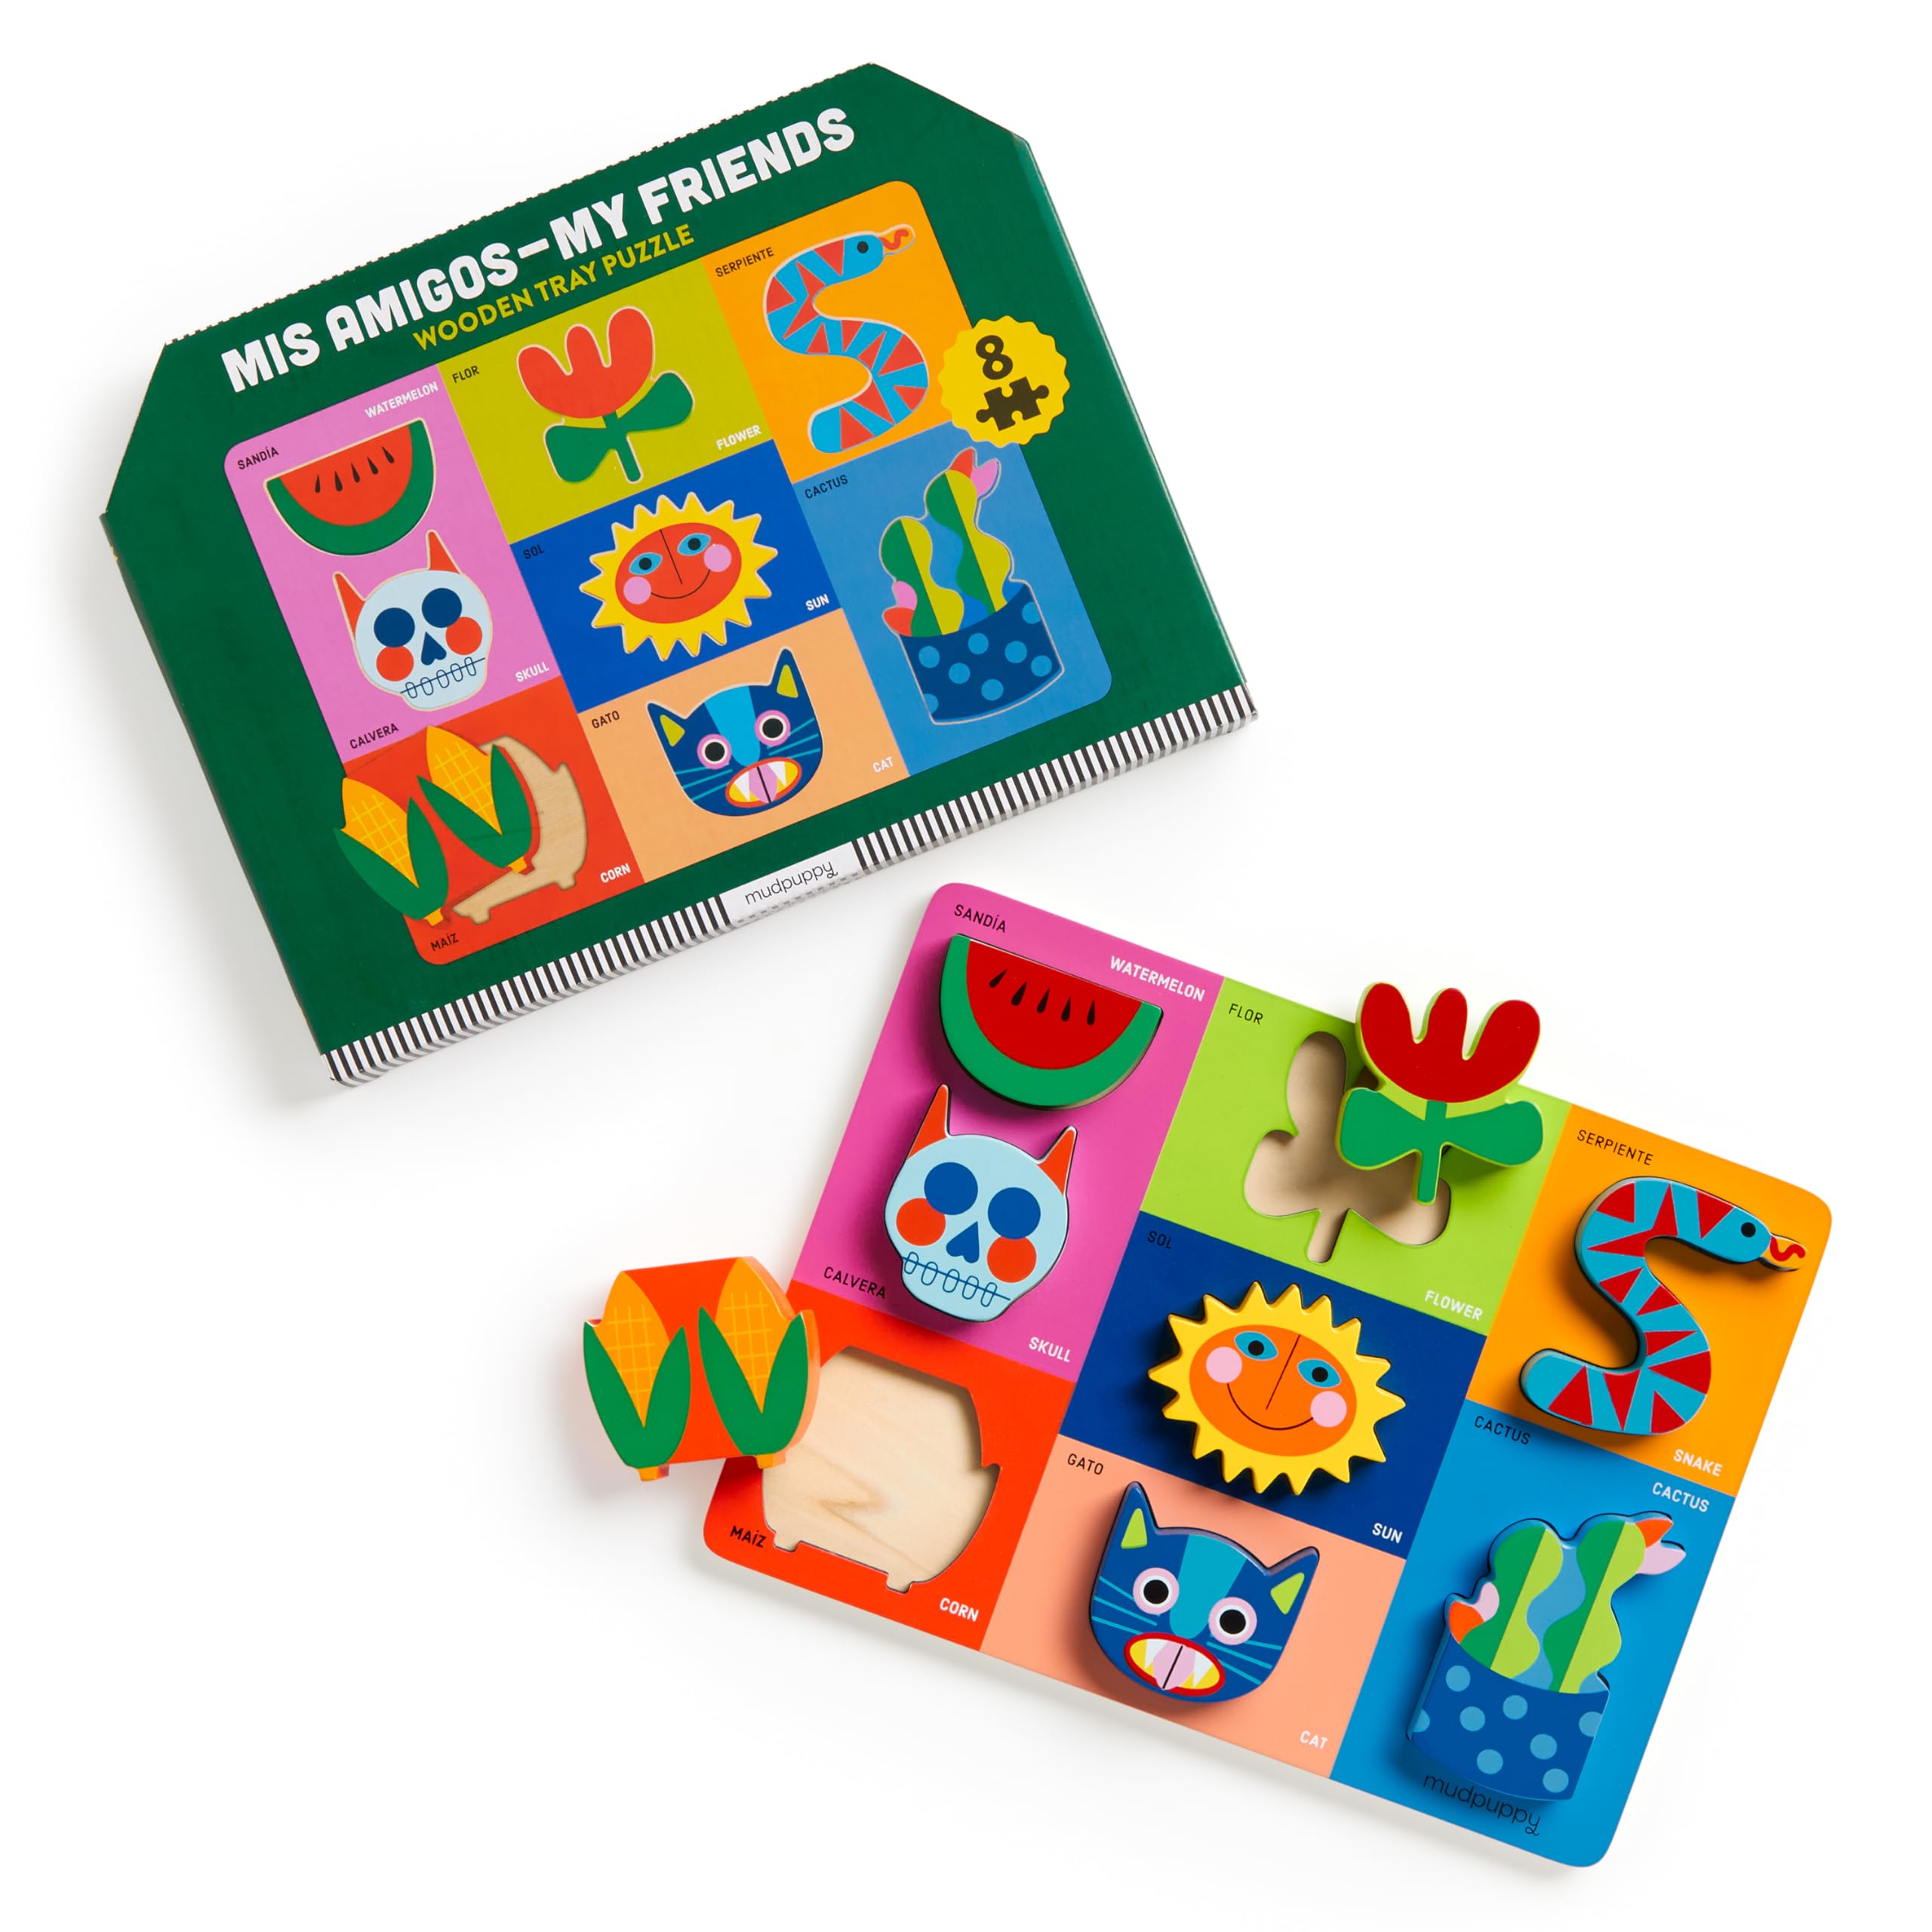 Mudpuppy Mis Amigos - Wooden Tray Puzzle with 8 Shaped Pieces with Spanish-English Labels from Latinx Heritage and Plywood Tray for Babies and Toddlers